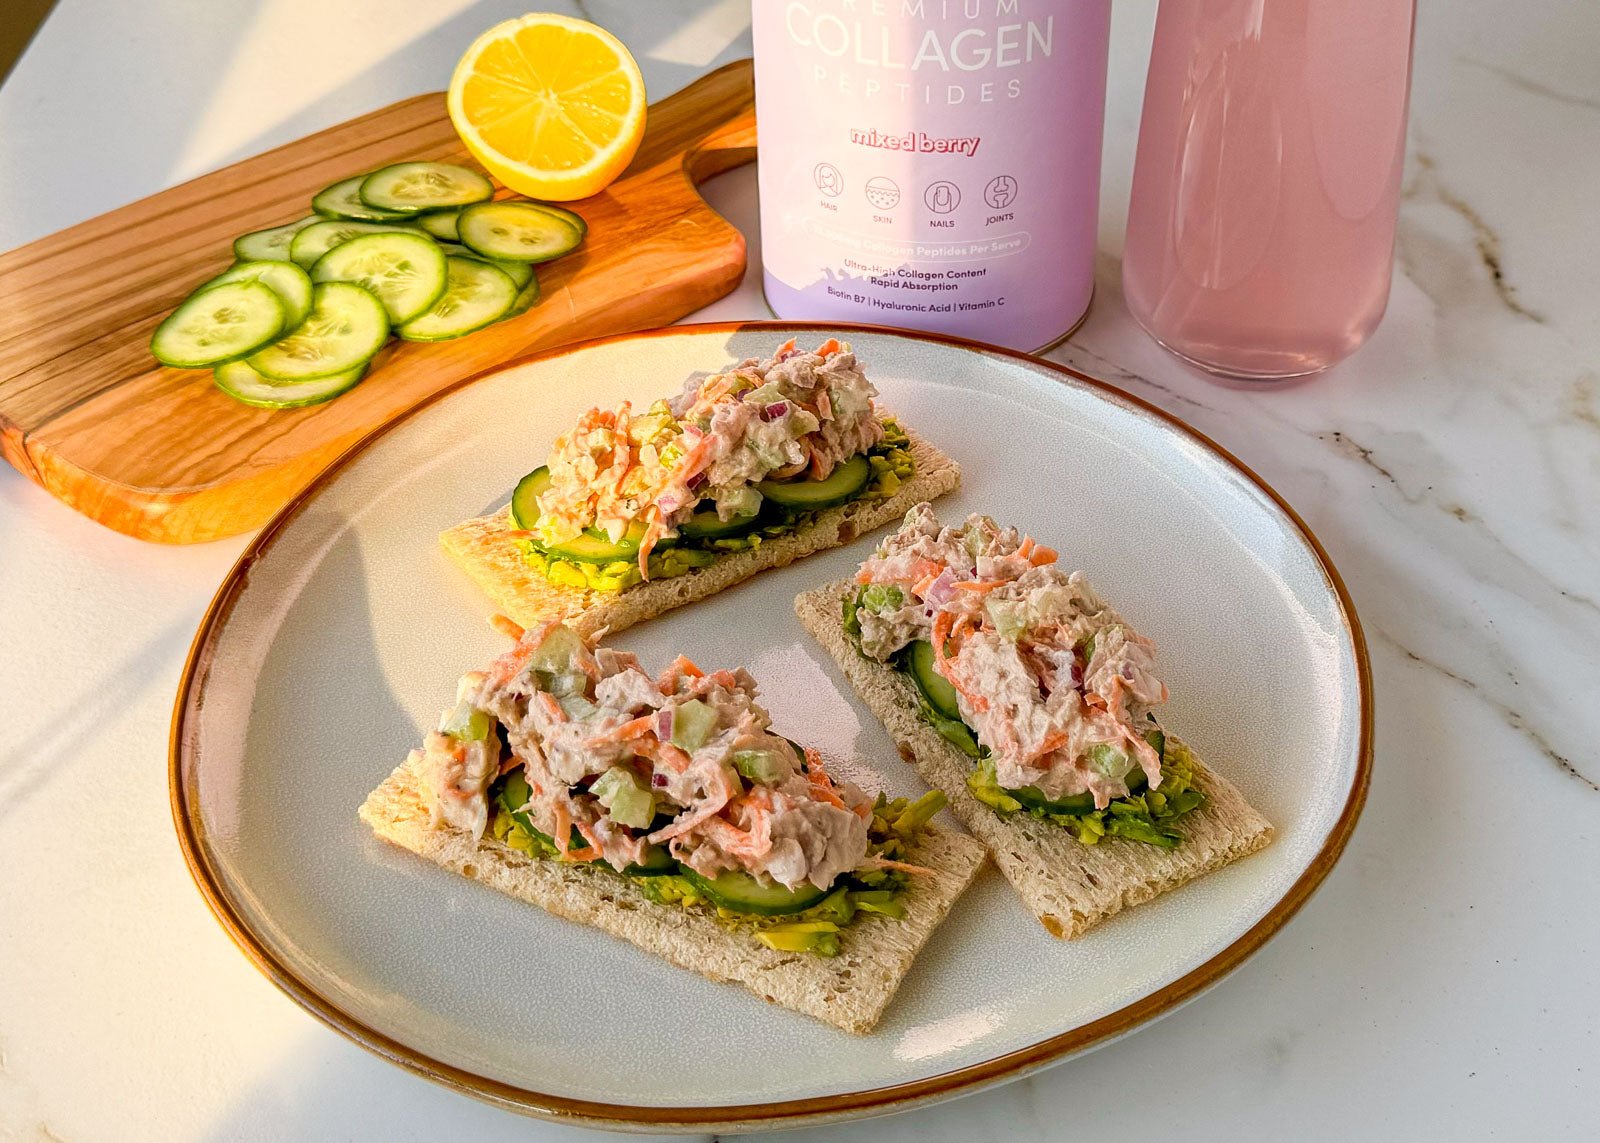 Tuna salad crackers - The Collagen Co.